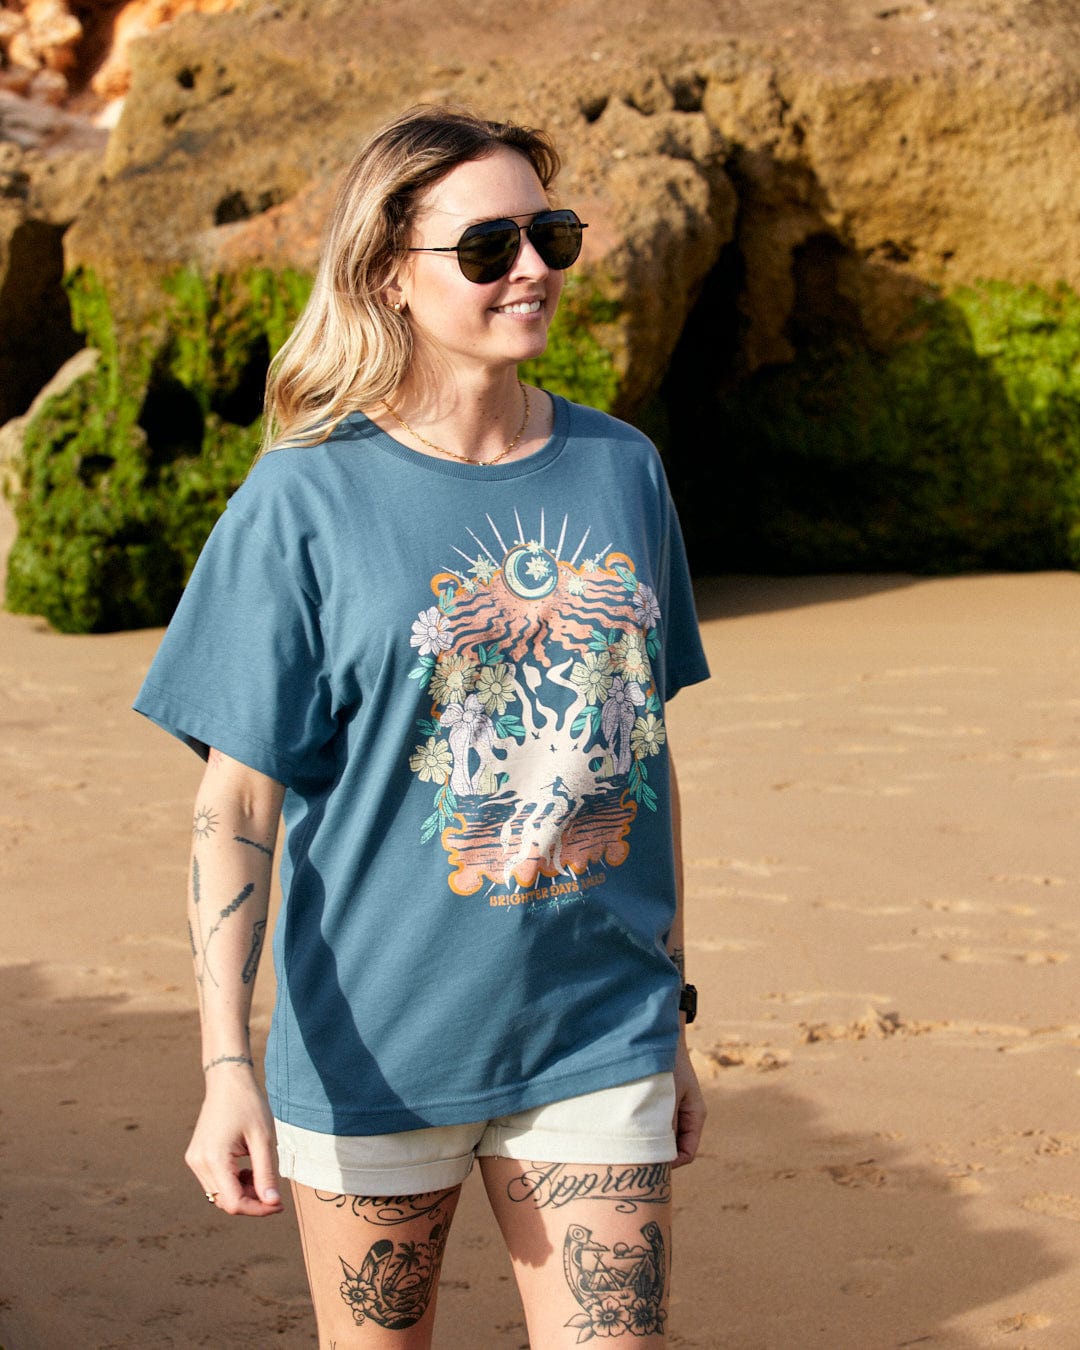 A woman wearing sunglasses and a Better Days - Recycled Womens Short Sleeve Relaxed T-Shirt in Teal made by Saltrock stands on a sandy beach with rocky cliffs in the background.